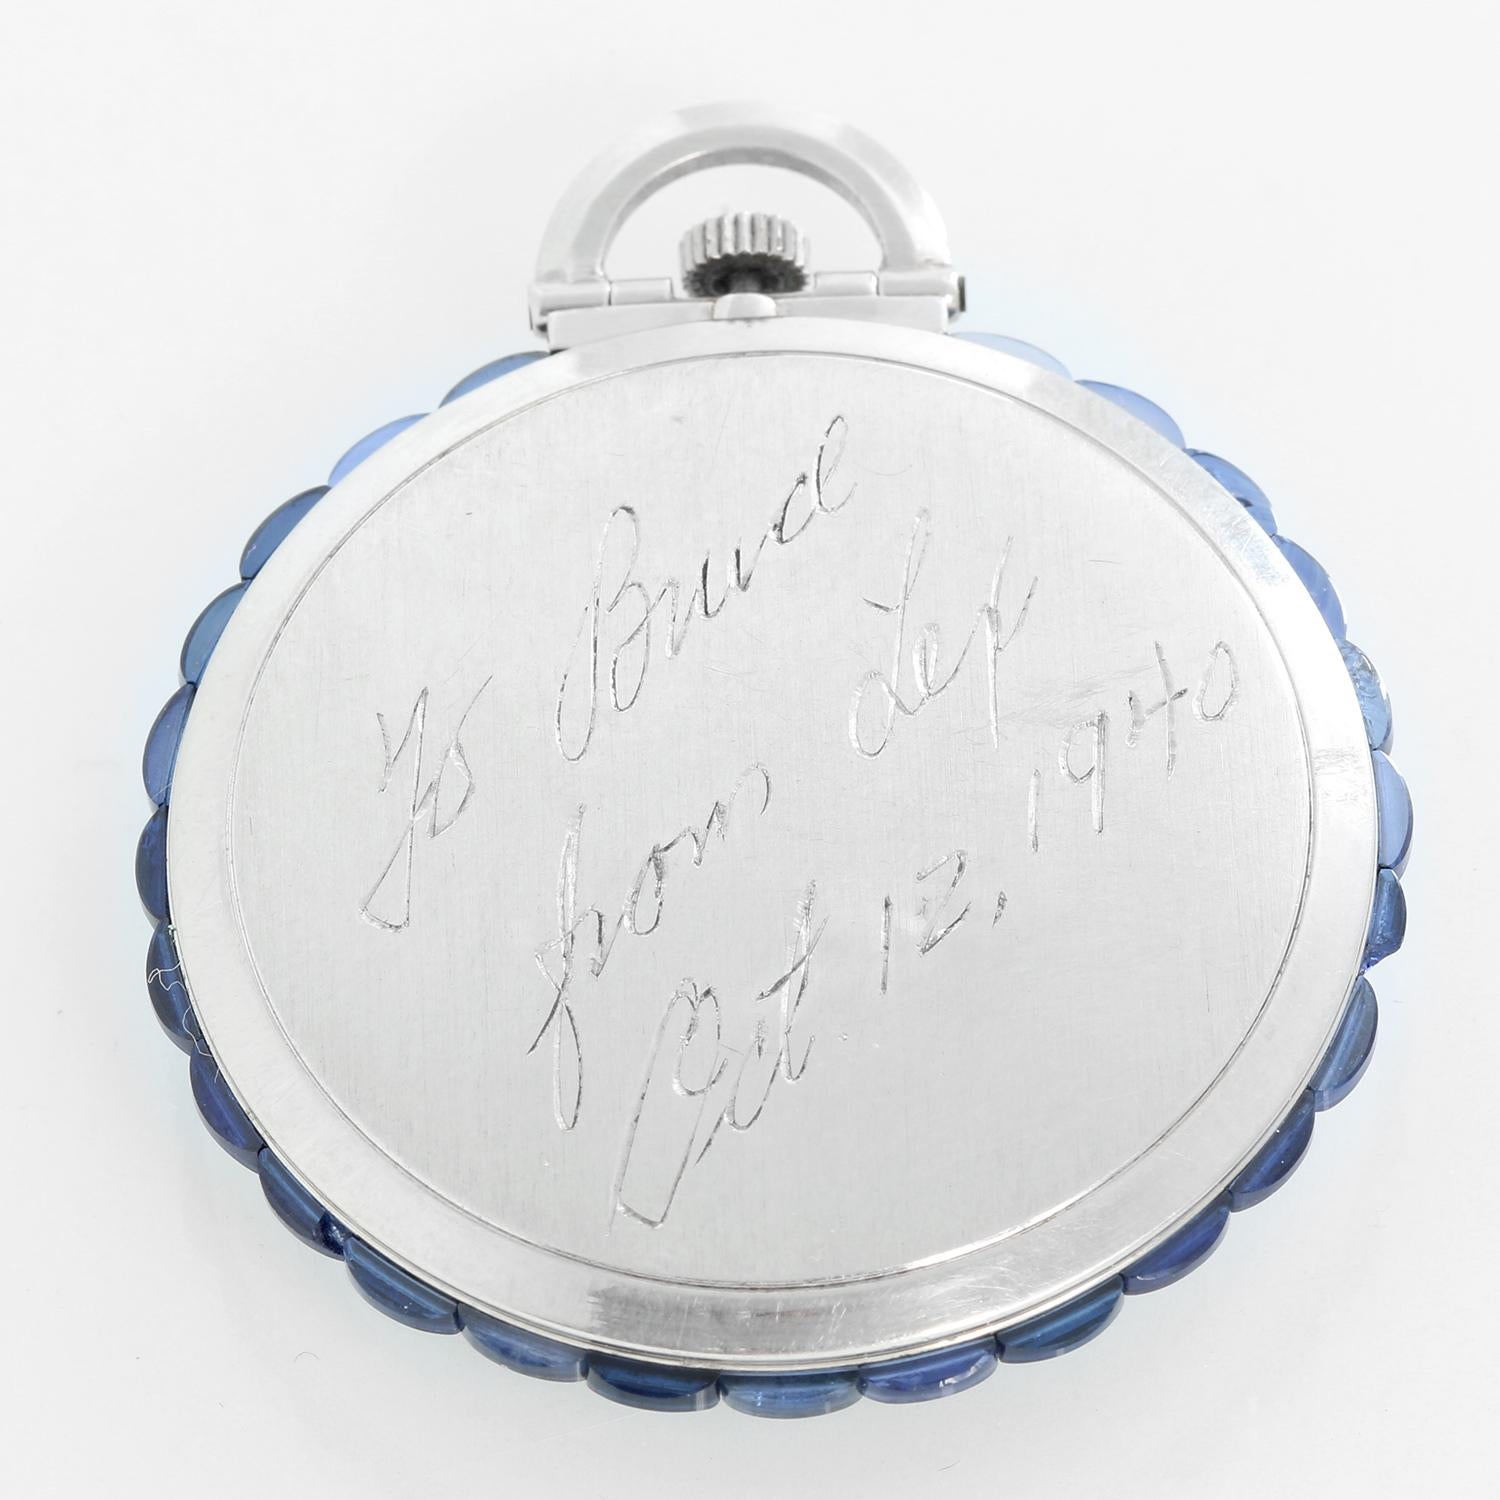 Longines Platinum Art Deco Pocket Watch - Manual winding. Platinum case sat with scalloped Sapphires ( 43 mm ); Inscription on caseback. Silver dial with personalized diamond dial. Pre -owned with custom box.